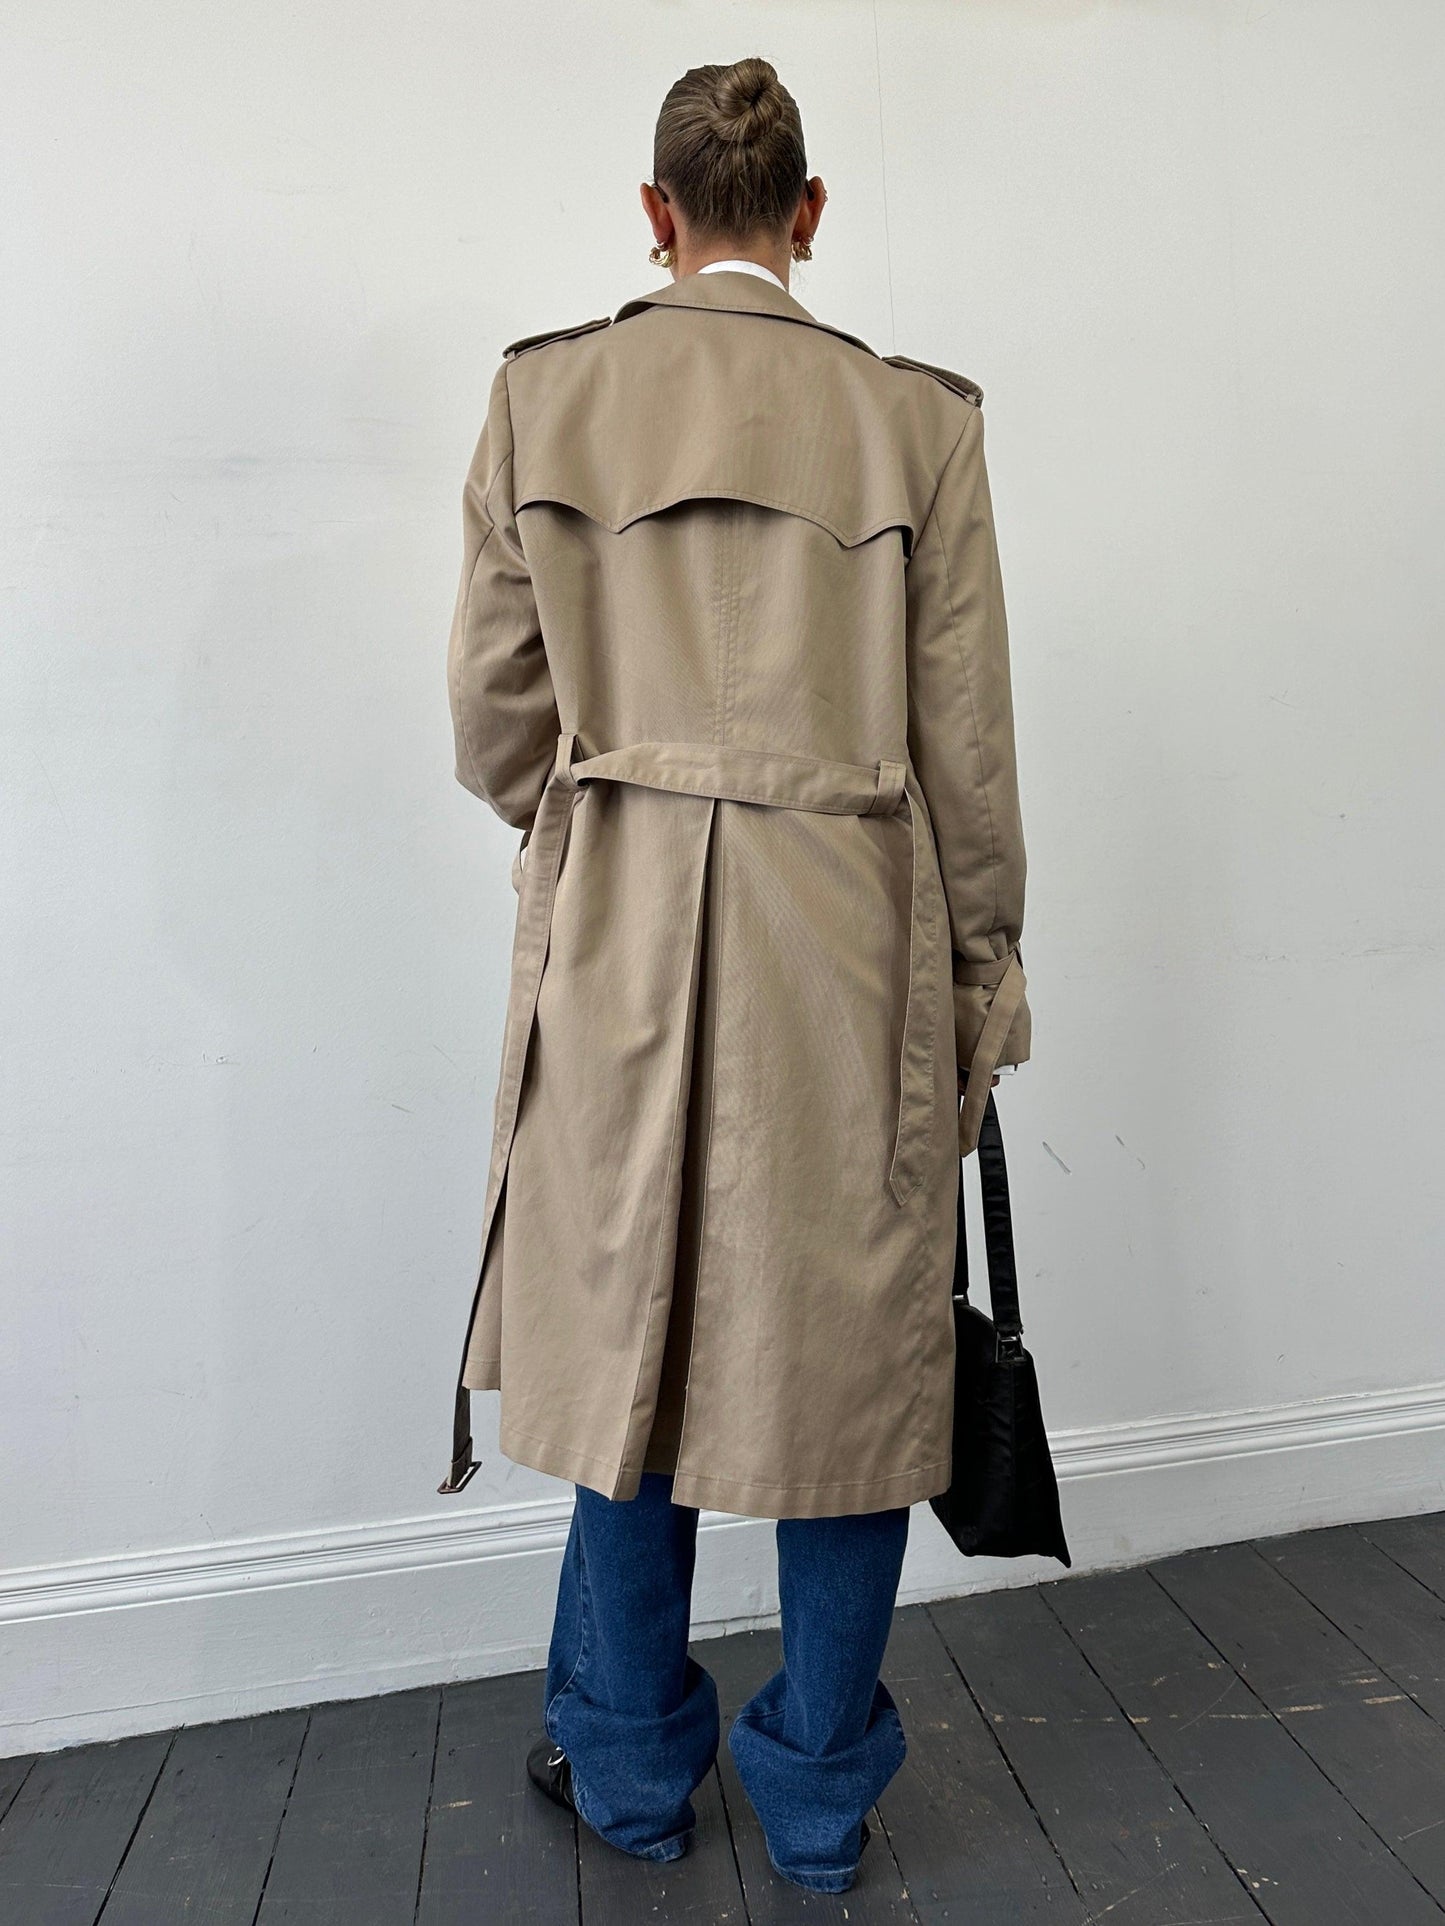 Christian Dior Monsieur Double Breasted Belted Trench Coat - L/XL - Known Source